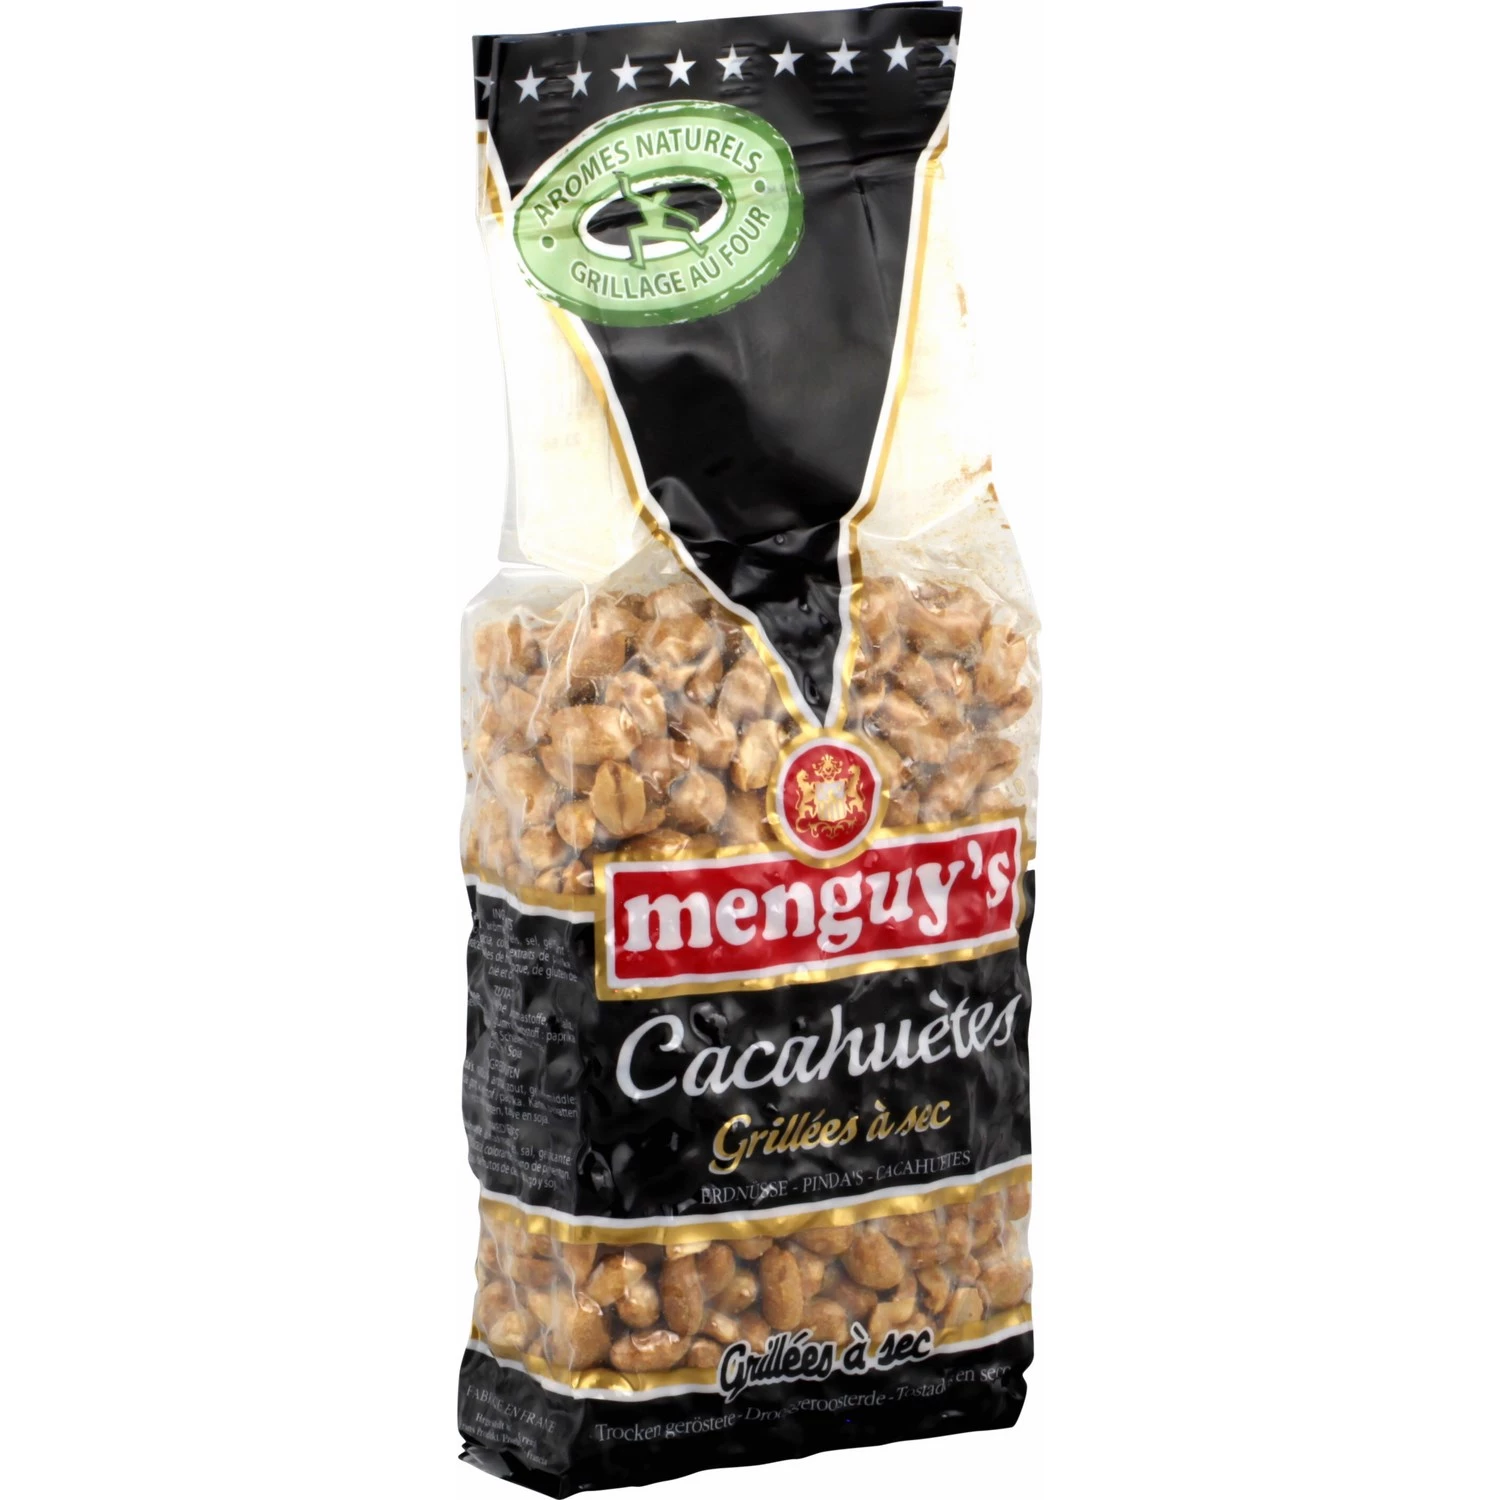 Dry Roasted Peanuts, 400g - MENGUY'S